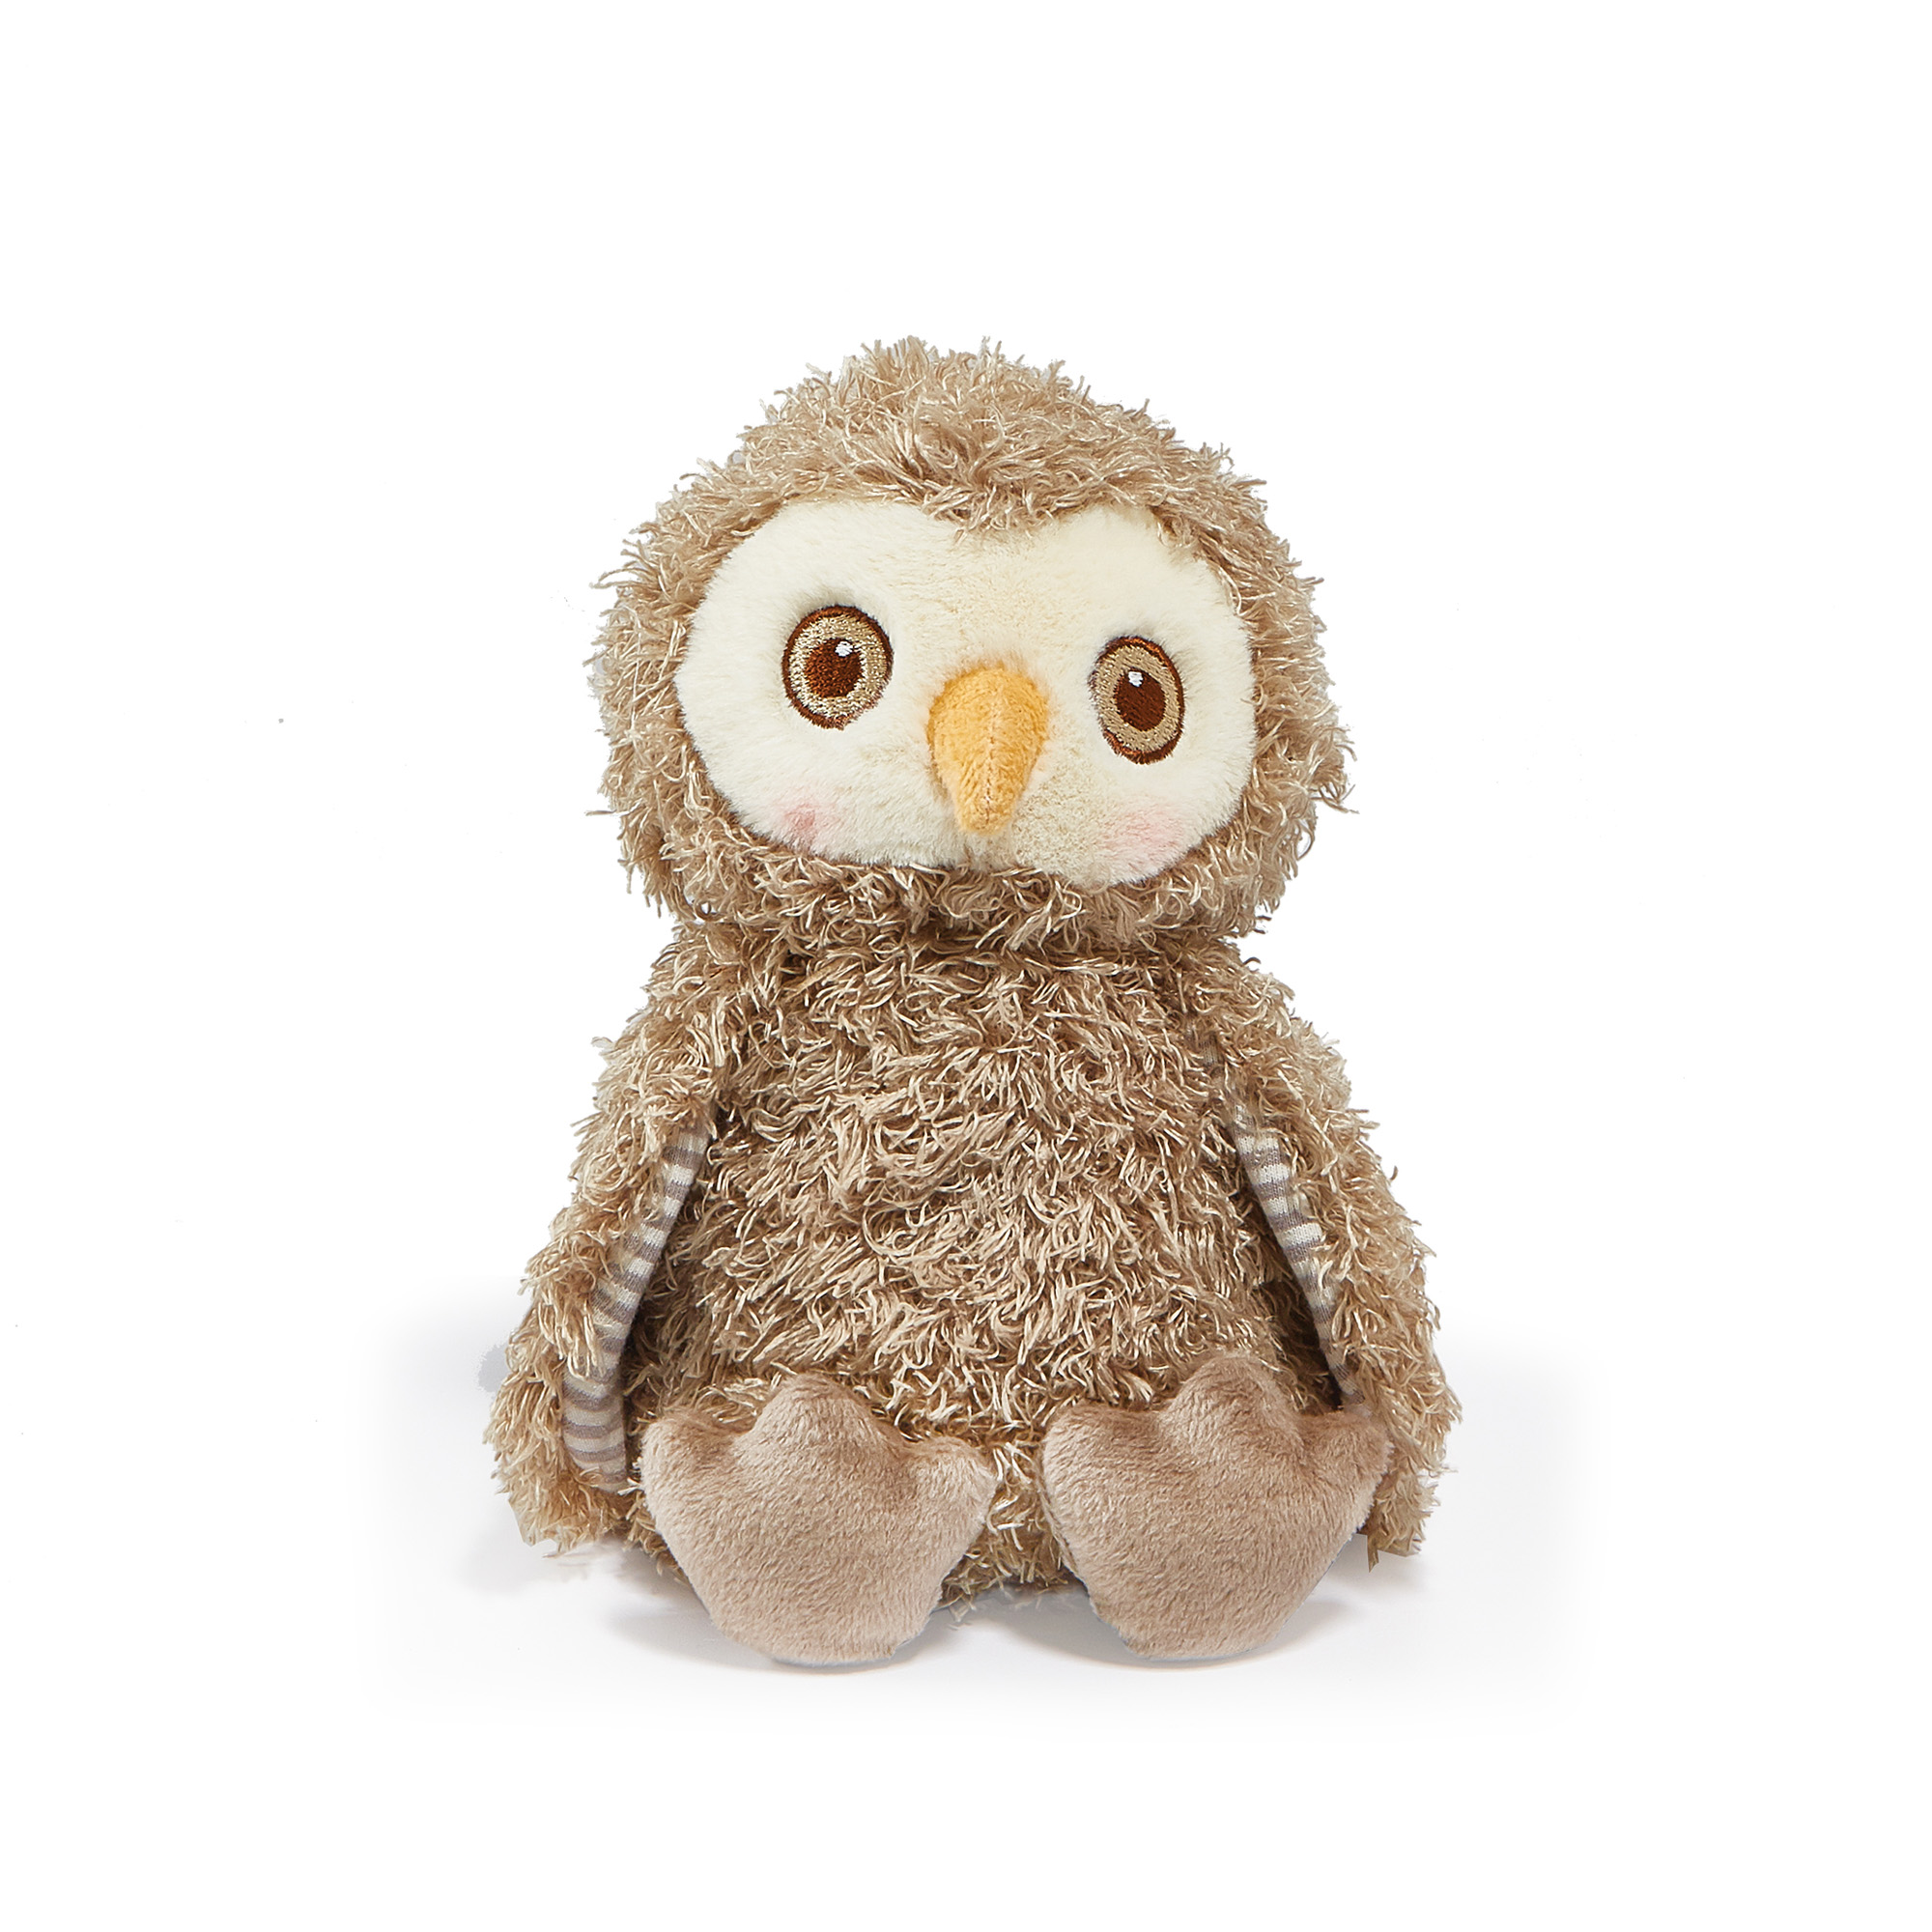 Peluche blink owl - Bunnies By The Bay